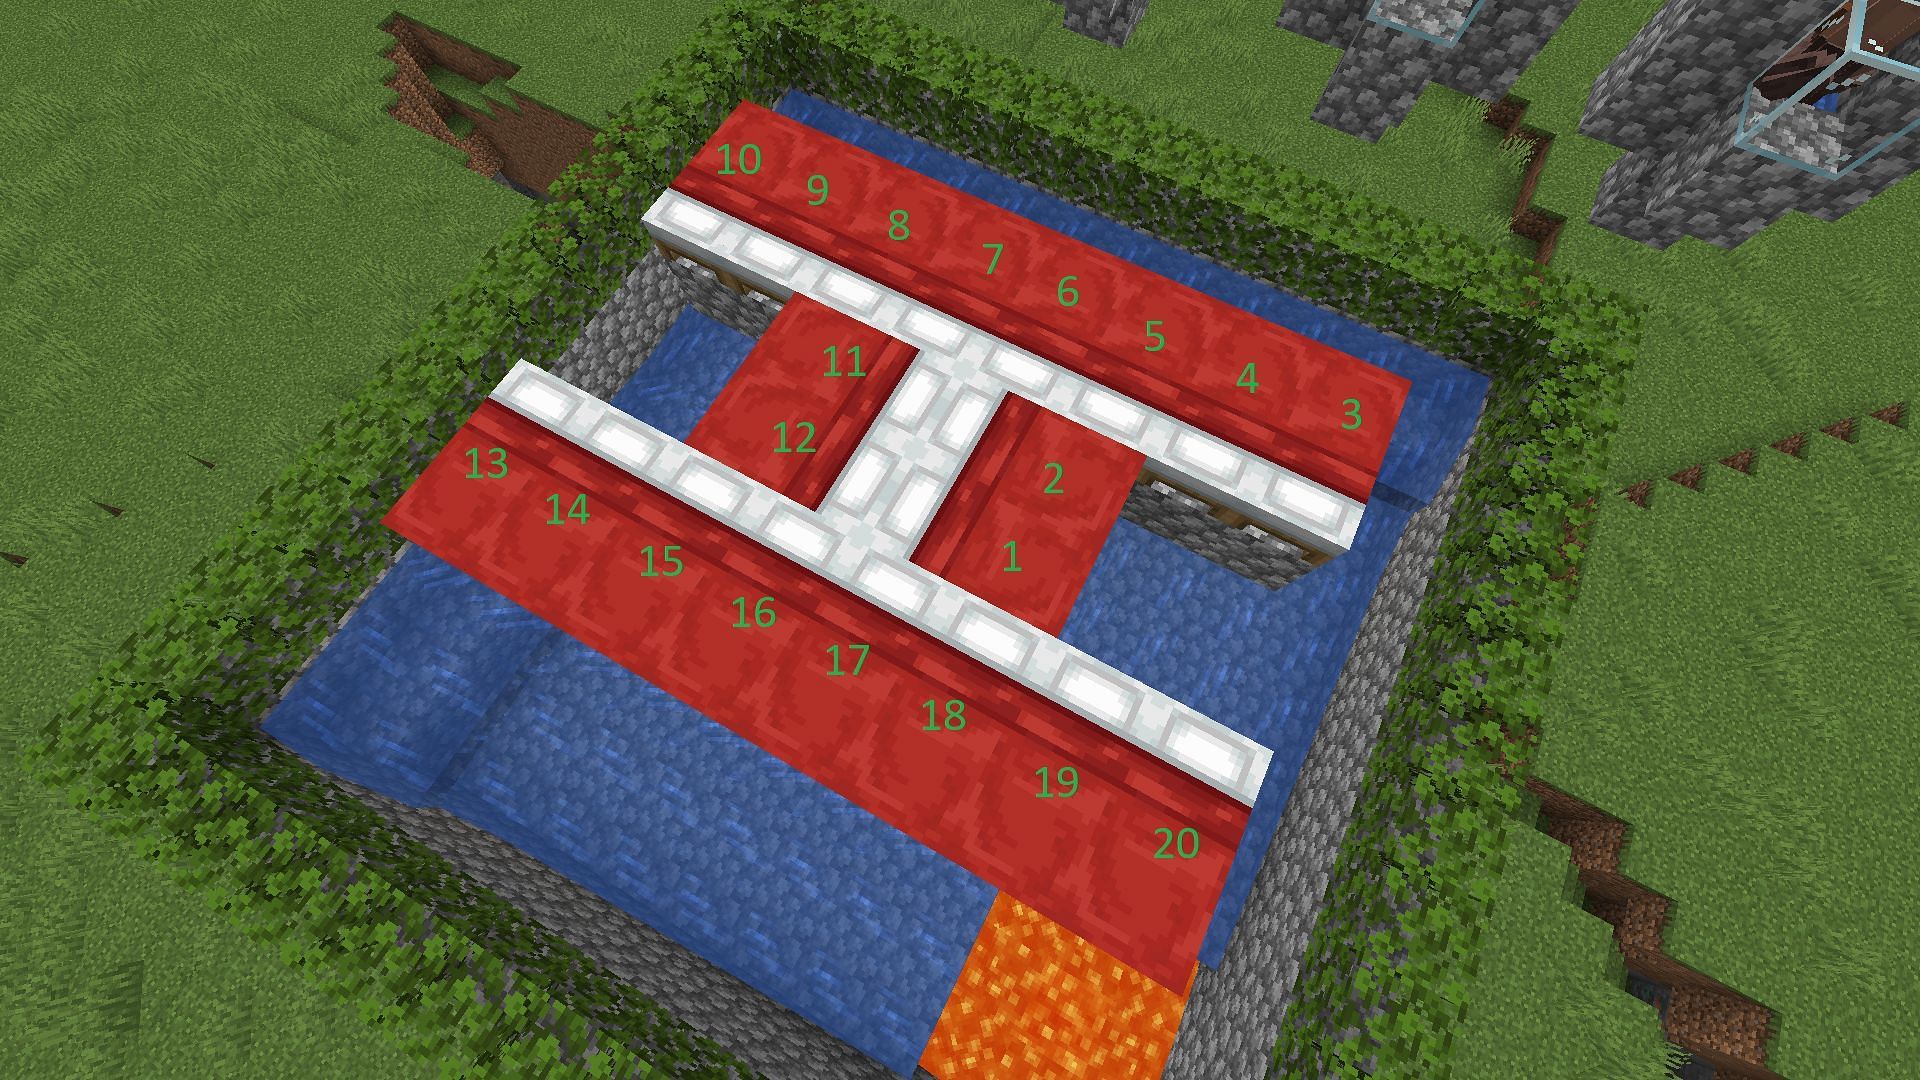 The beds as well as the order in which they should be placed (Image via Minecraft)